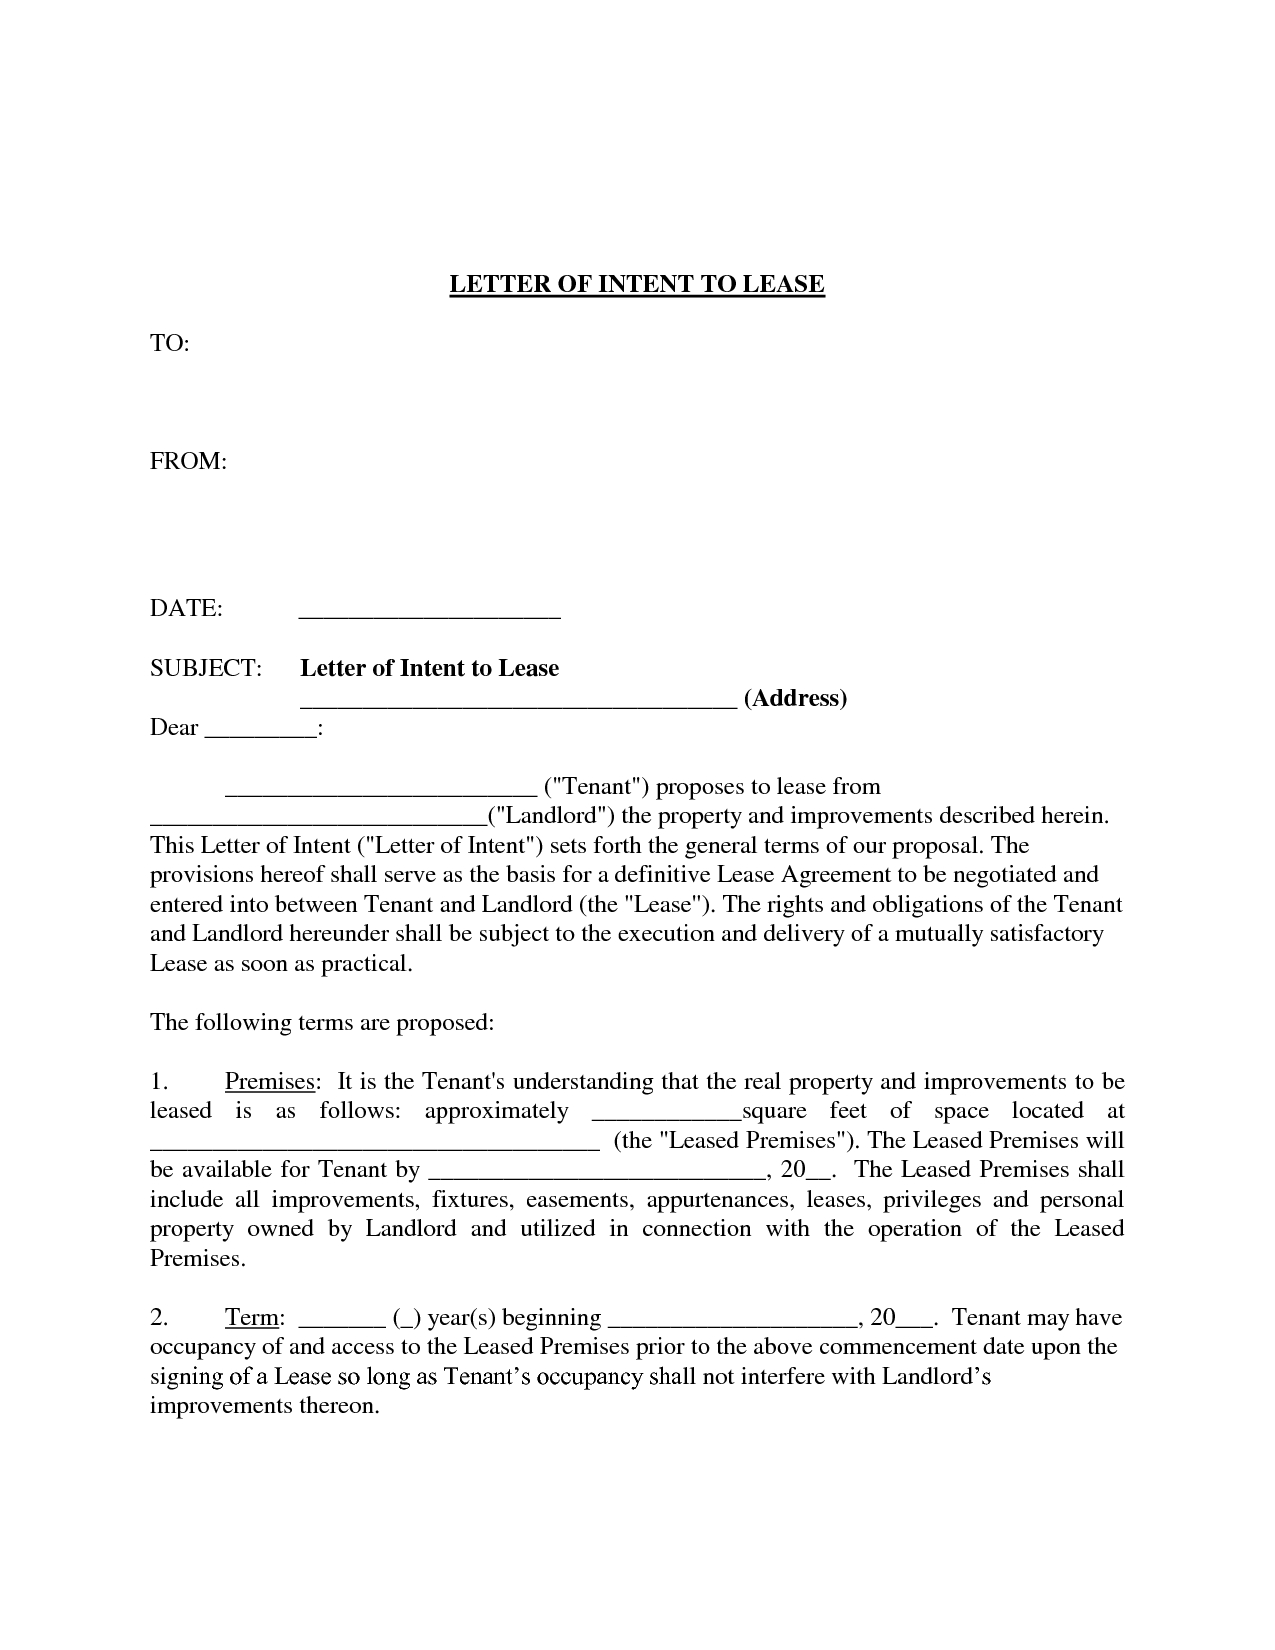 Commercial Real Estate Letter Of Intent Template - Templatemercial Real Estate Letter Intent to Lease for Space